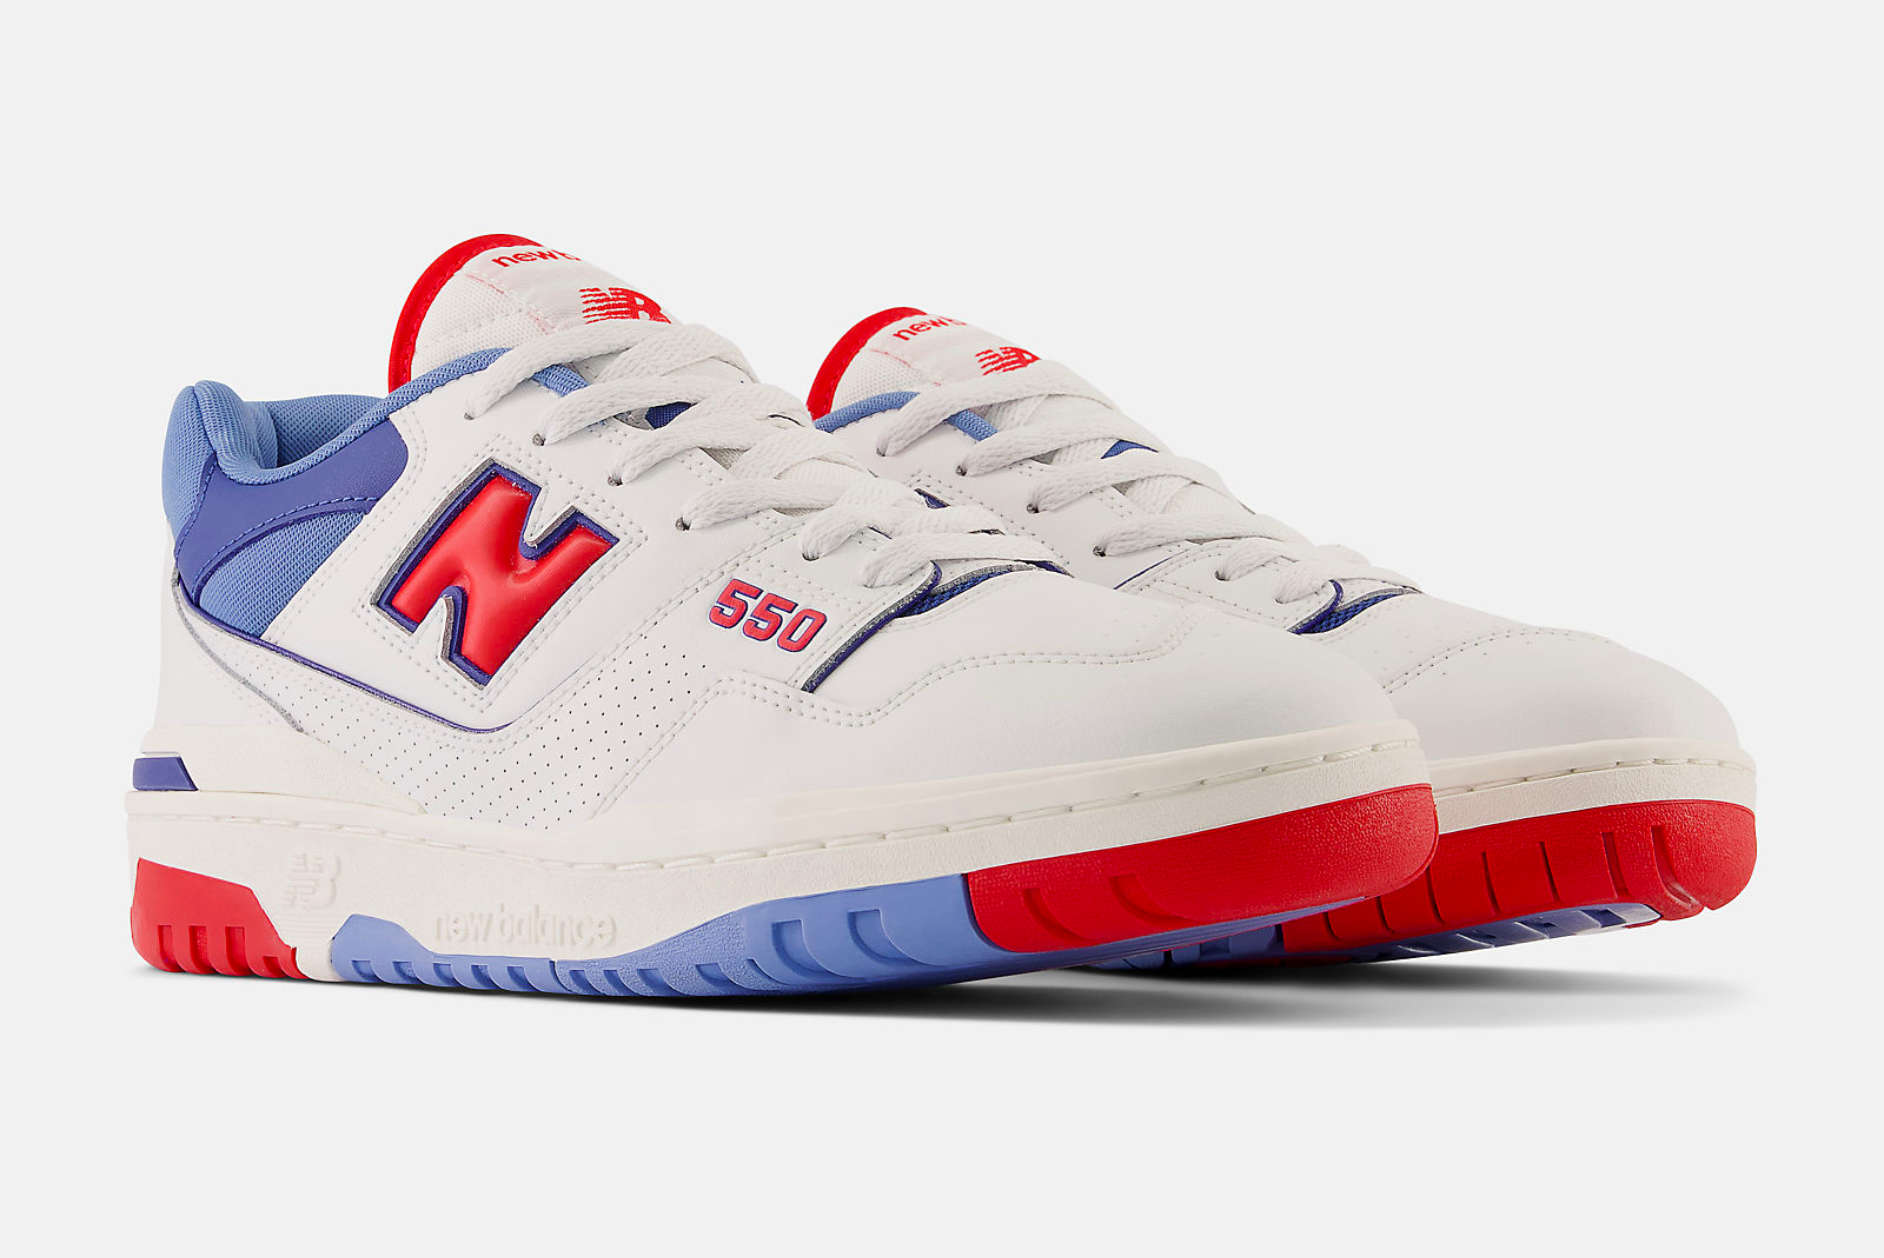 New Balance Drops Fresh Summer Colorways of the 997 Sport